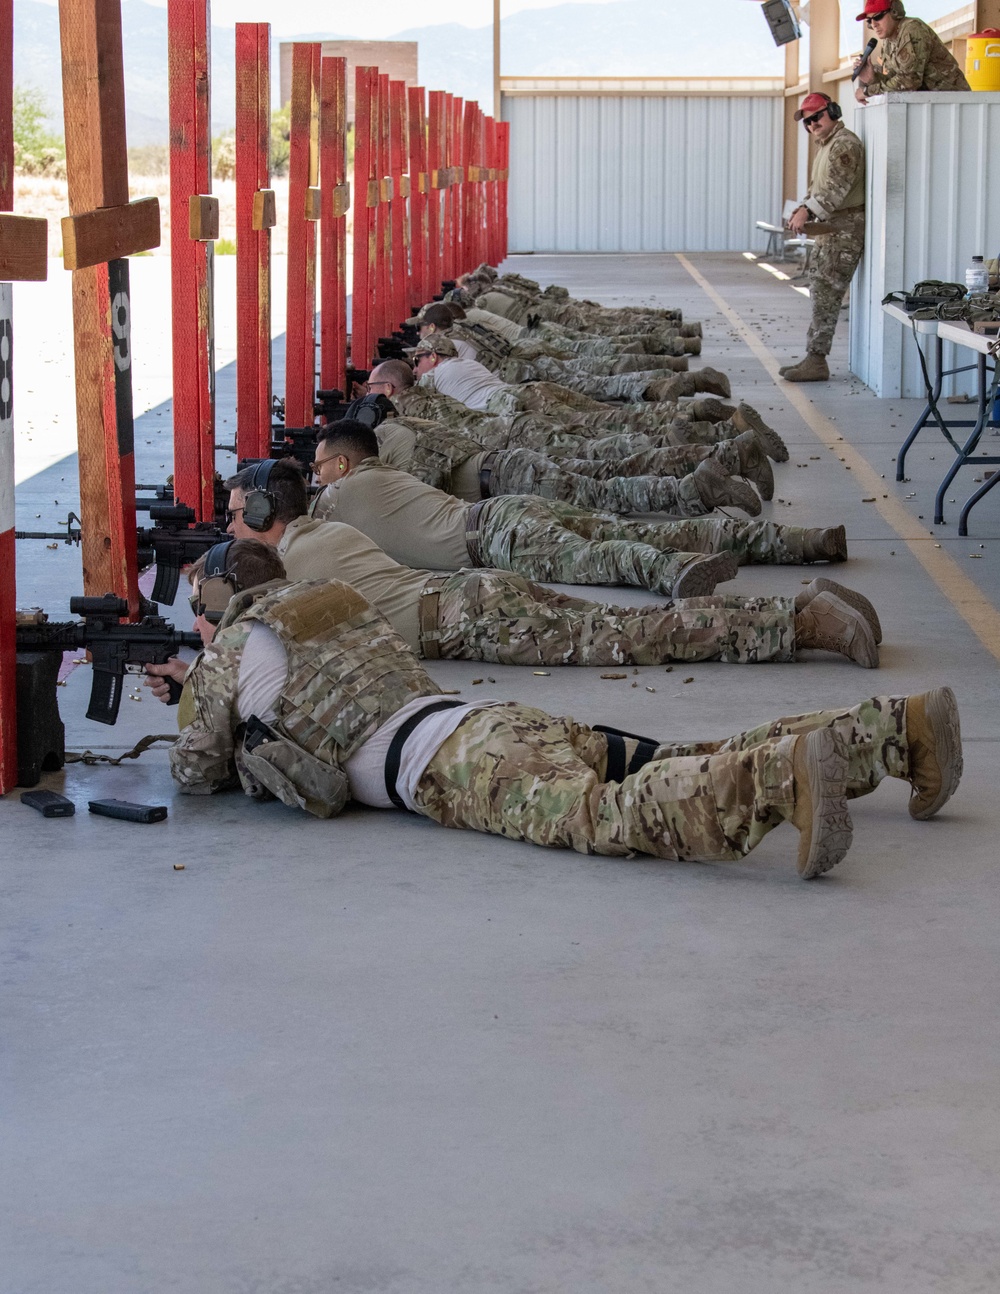 305th Rescue Squadron Weapons Training at Davis-Monthan